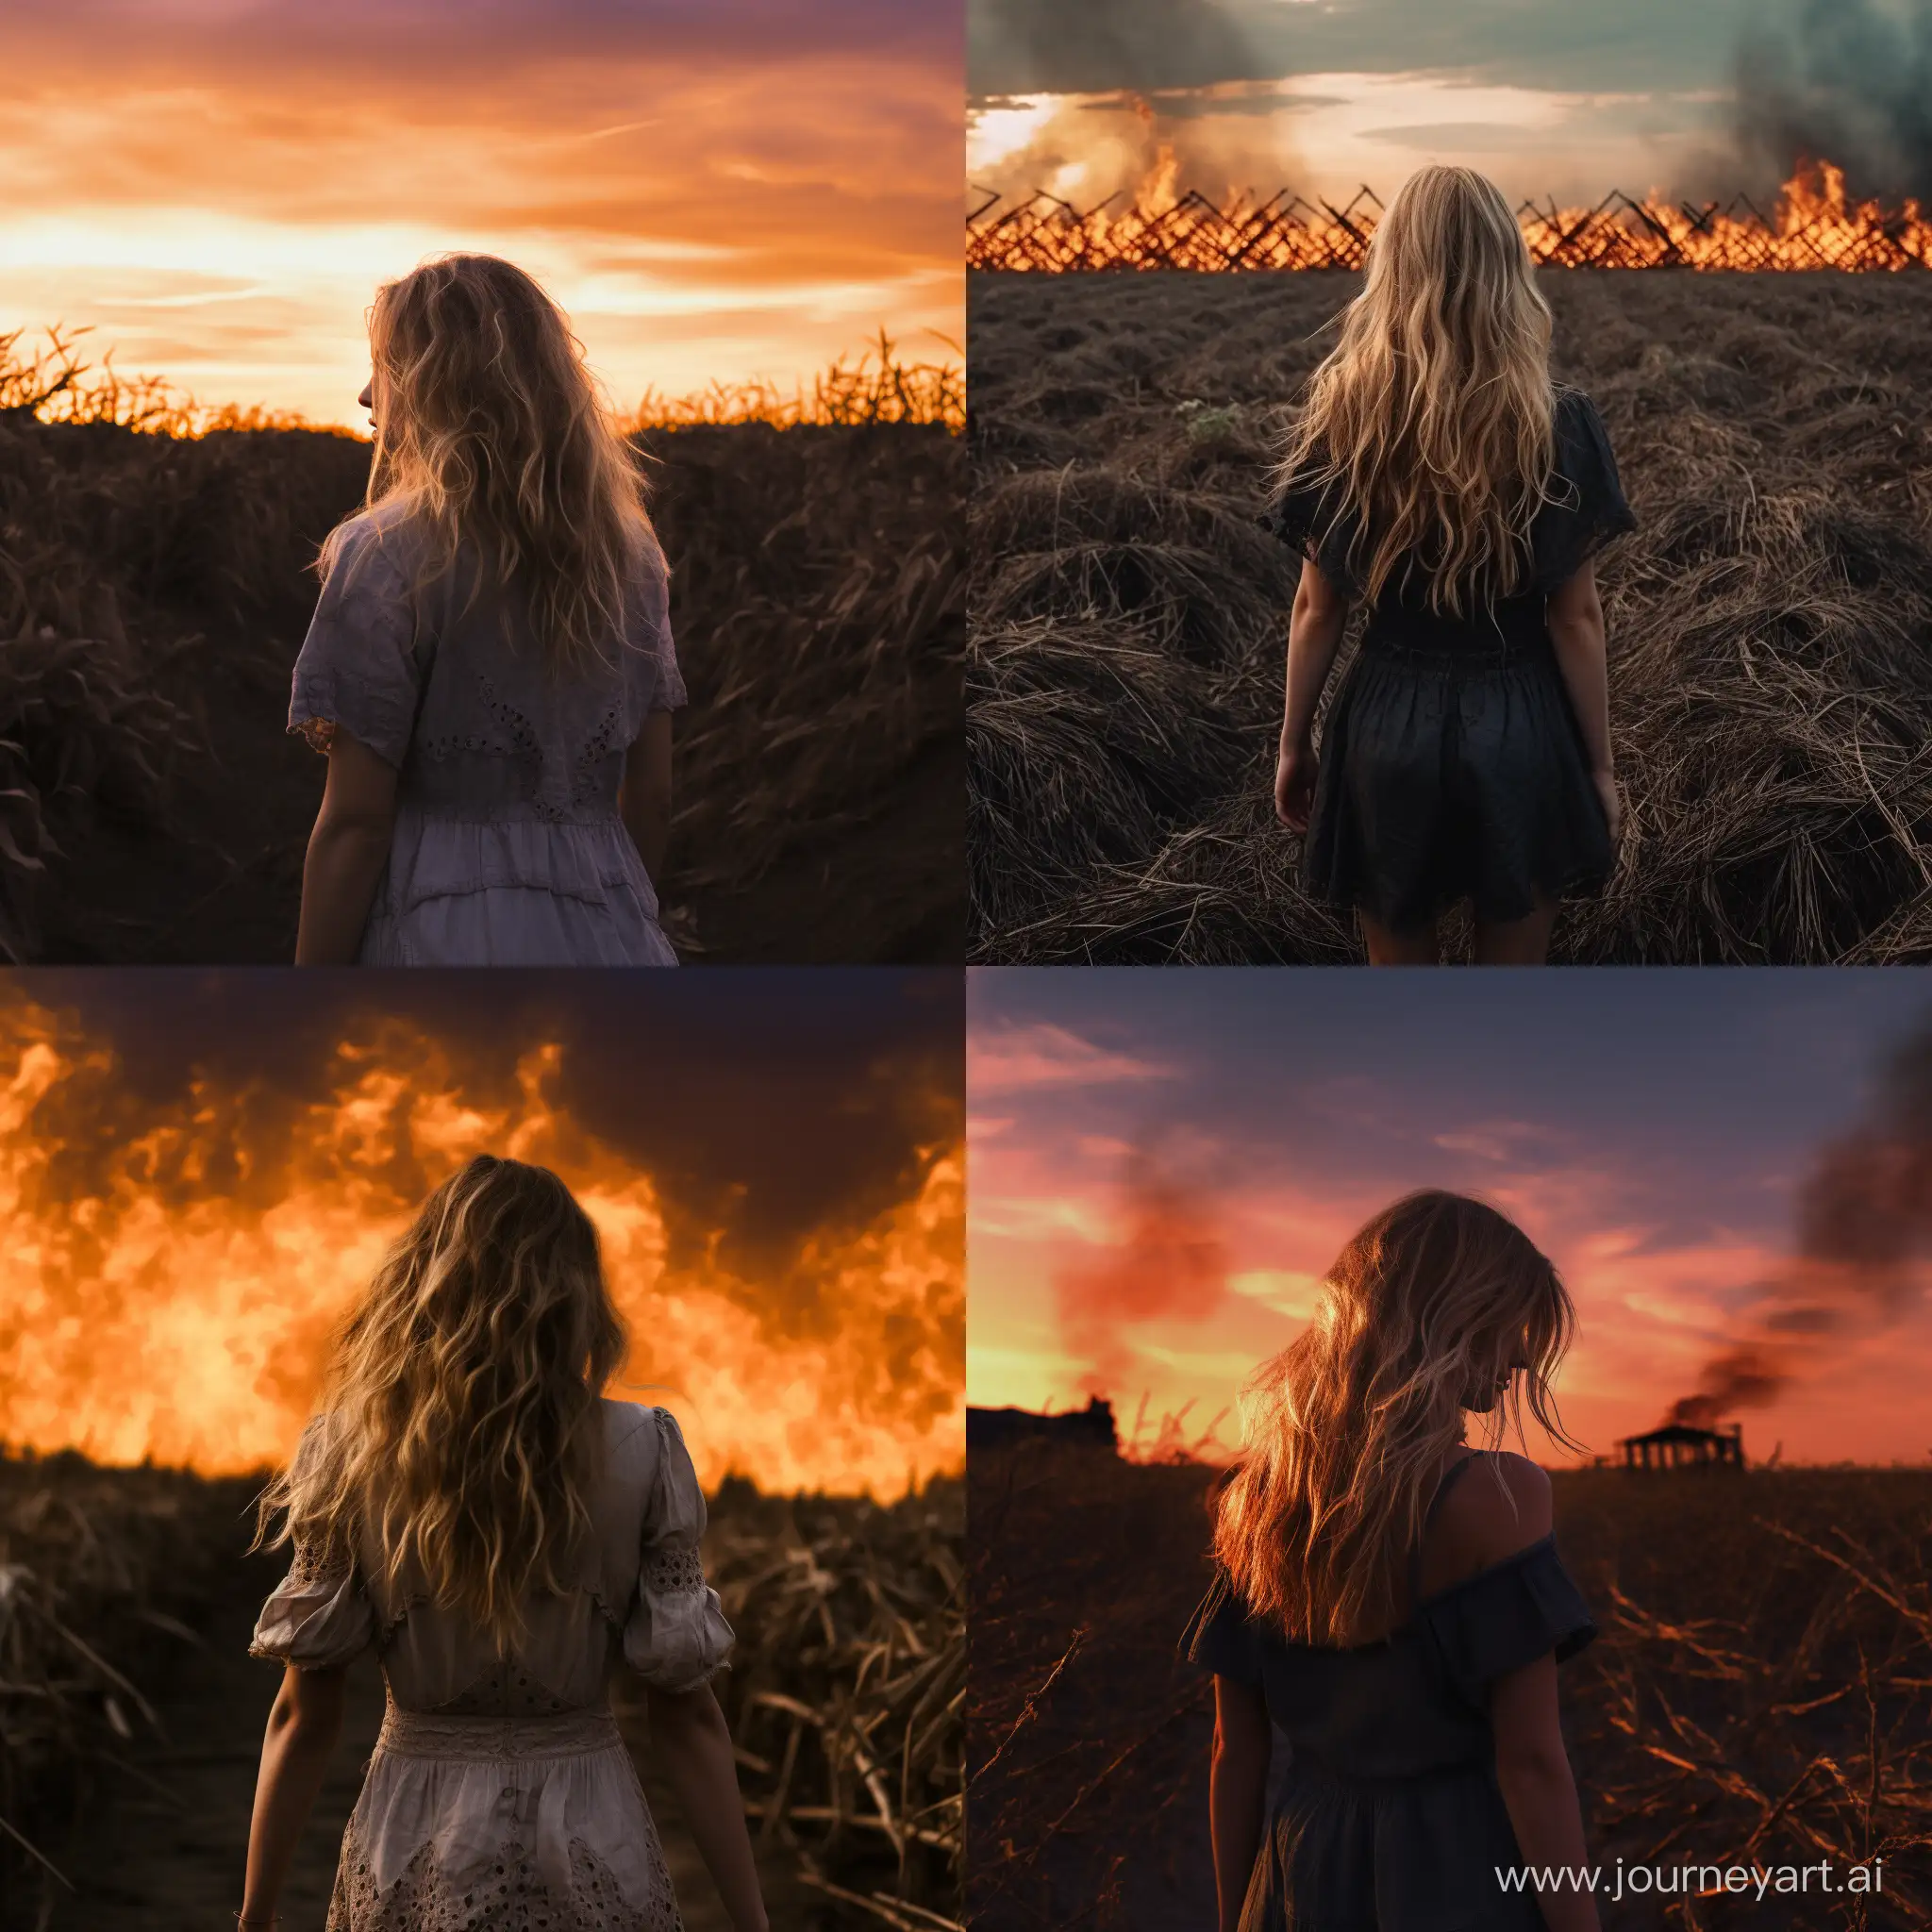 BlondishHaired-Girl-Contemplating-a-Burning-Field